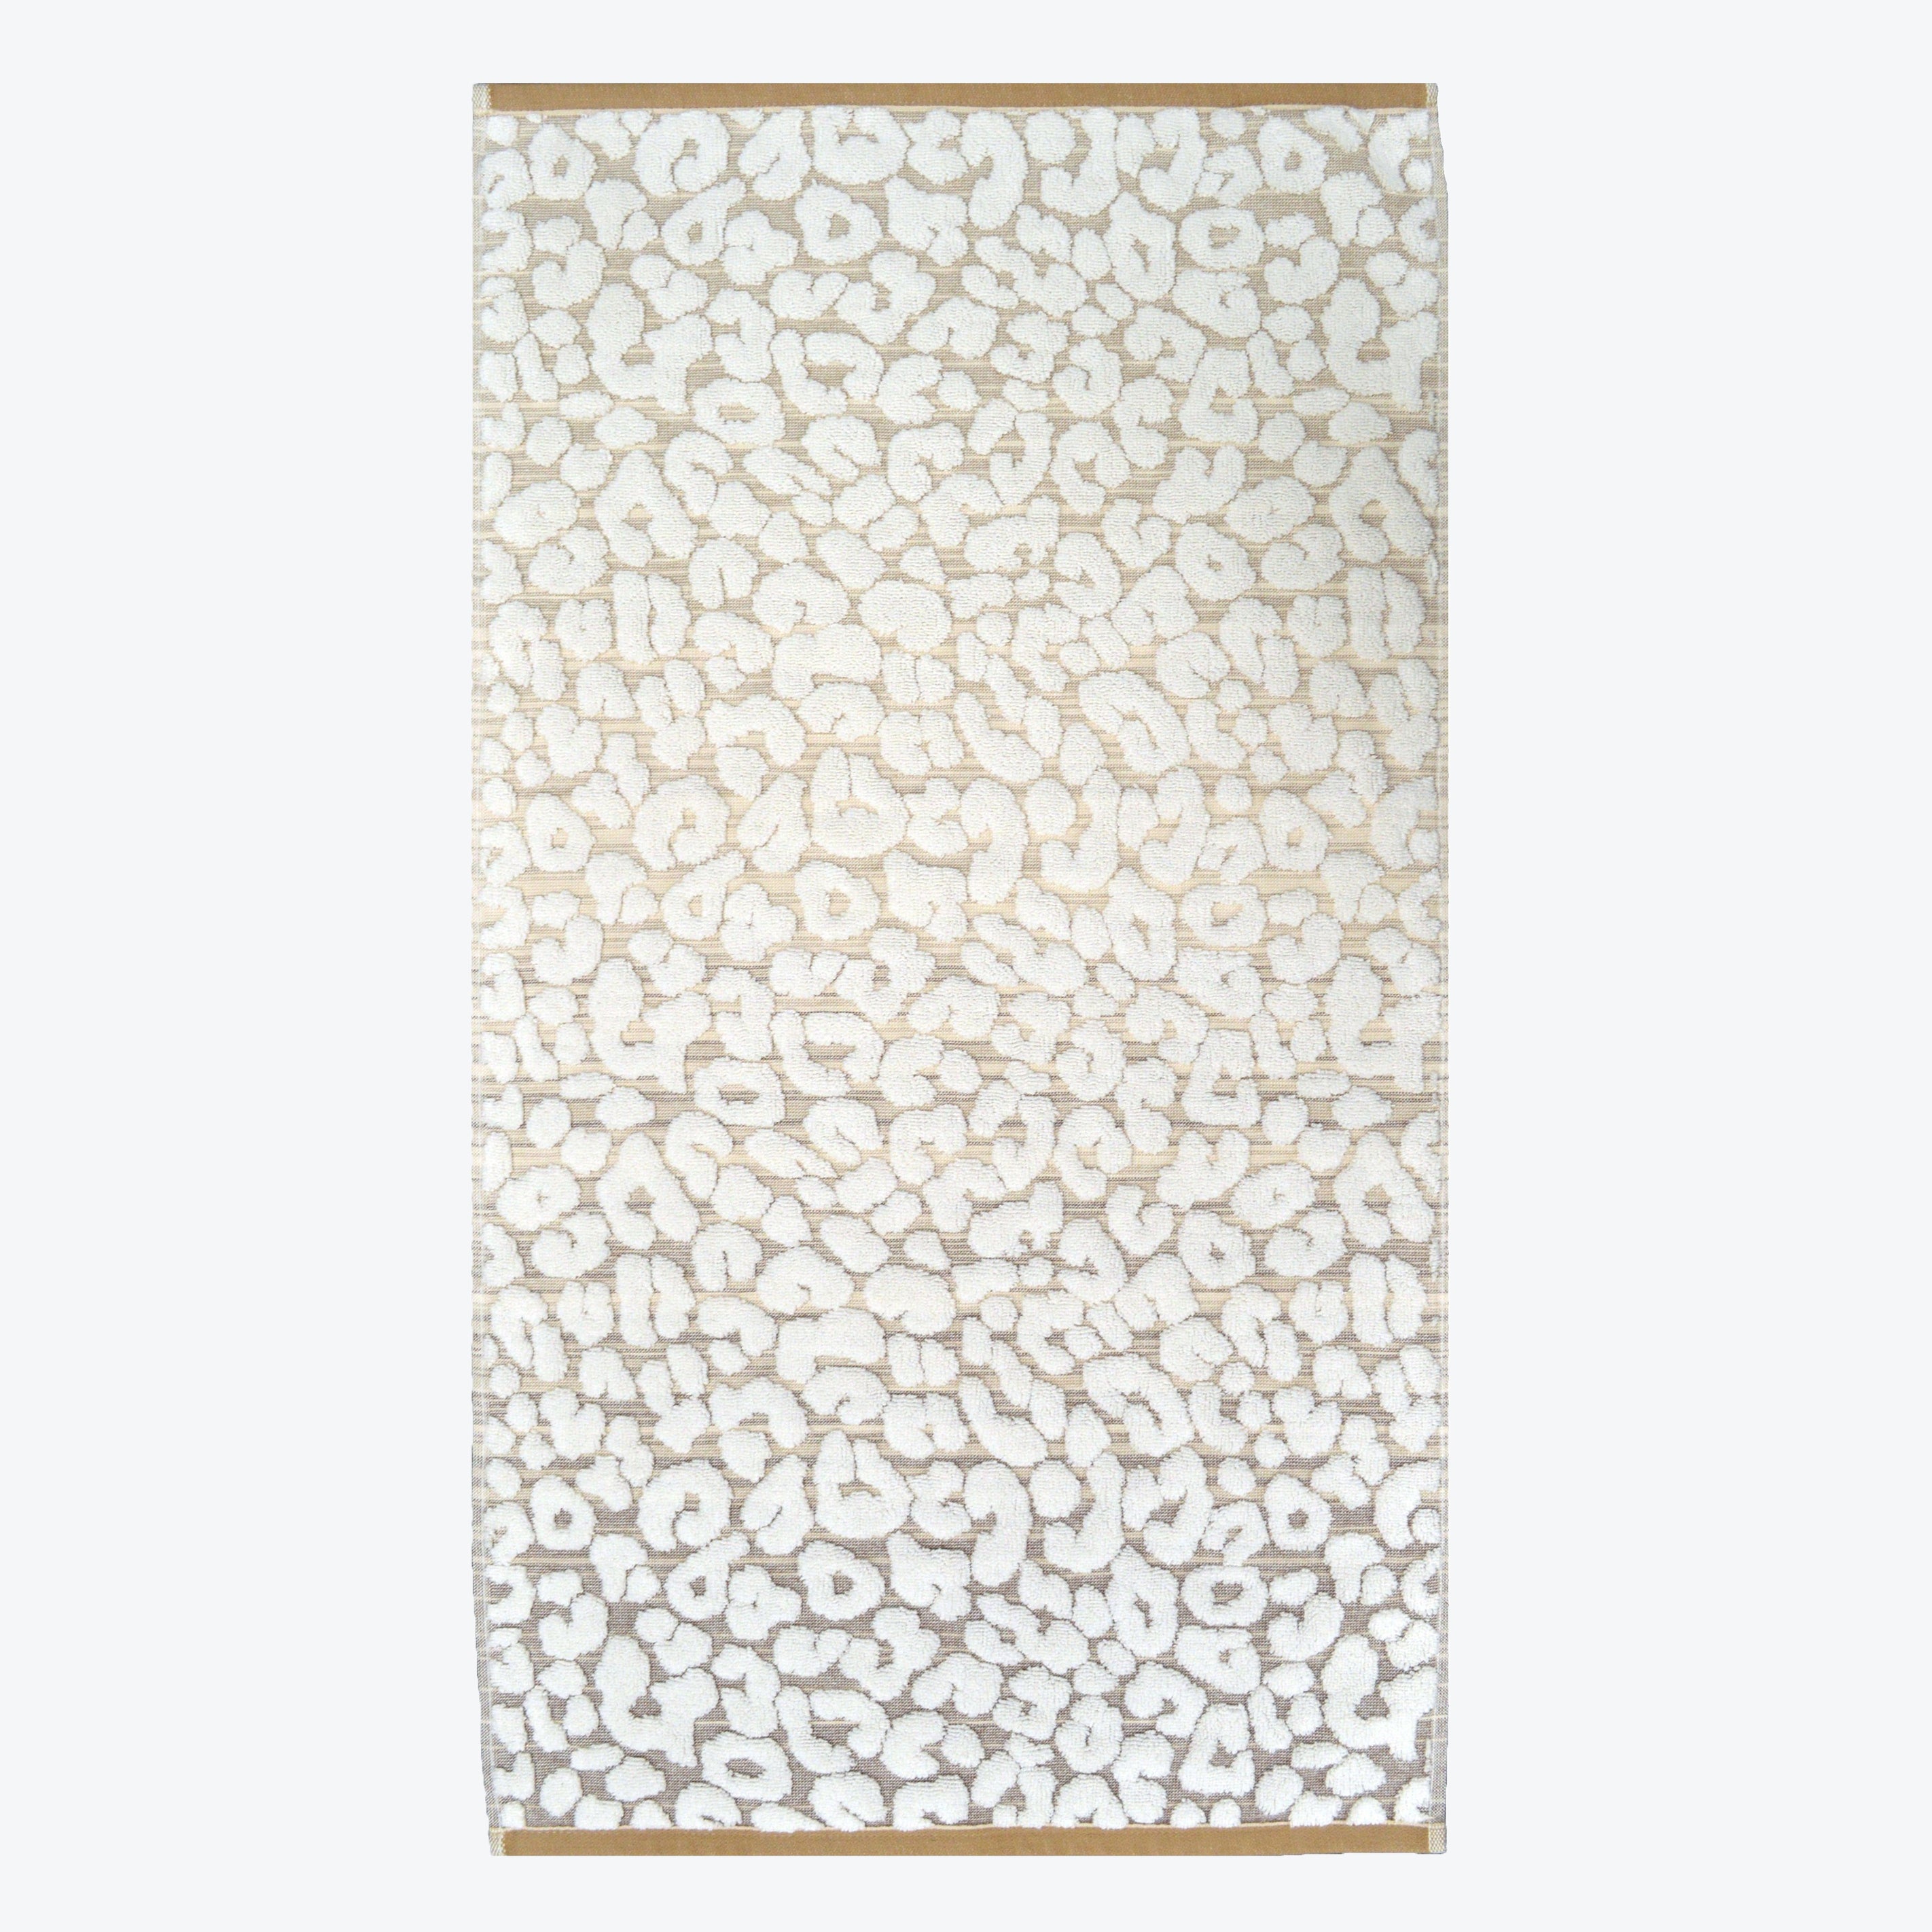 Natural/Beige Leopard print towel - Stylish patterned towels for the bathroom